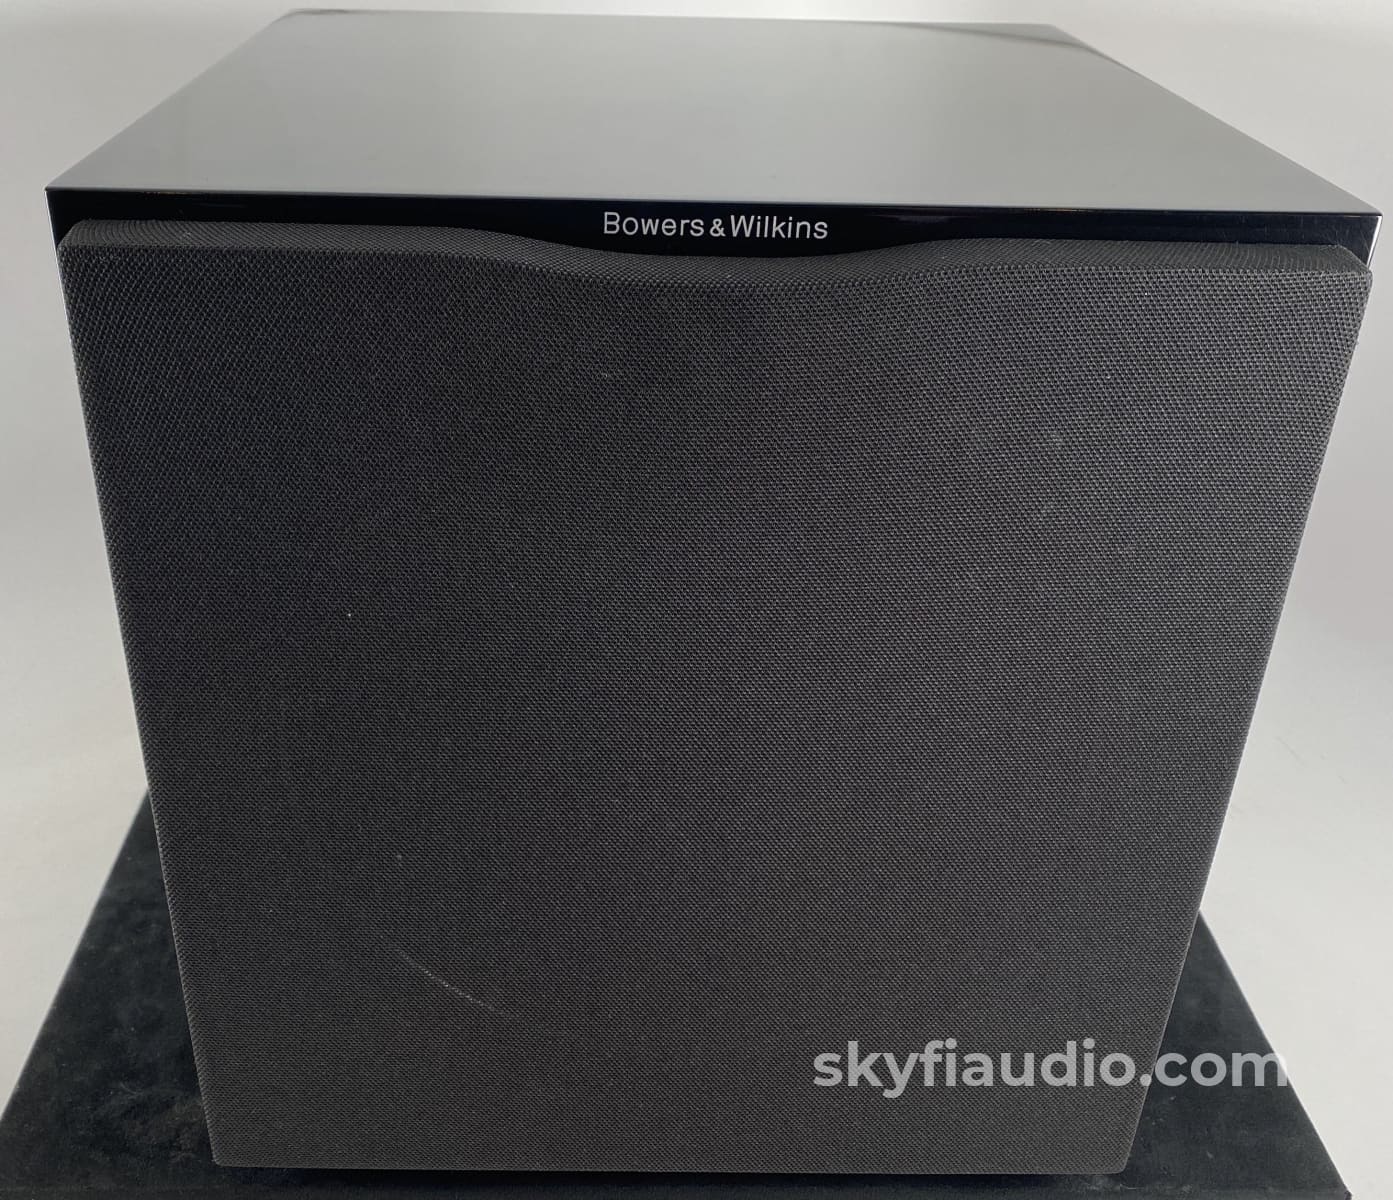 Bowers & Wilkins Asw10Cm Compact Subwoofer Speakers